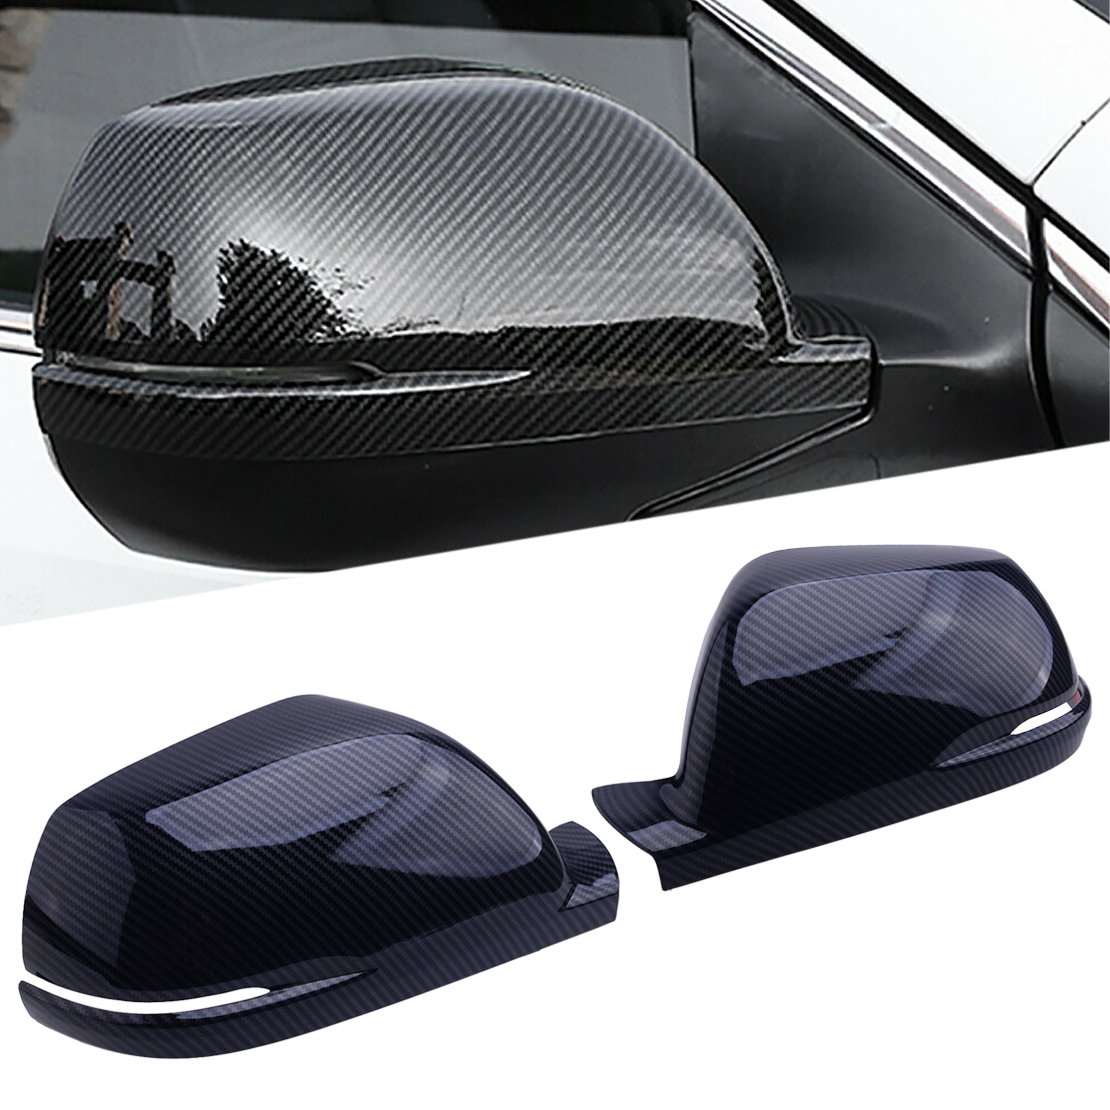 2x Carbon Fiber Style Rearview Wing Mirror Cover Trim Fit For Honda CR